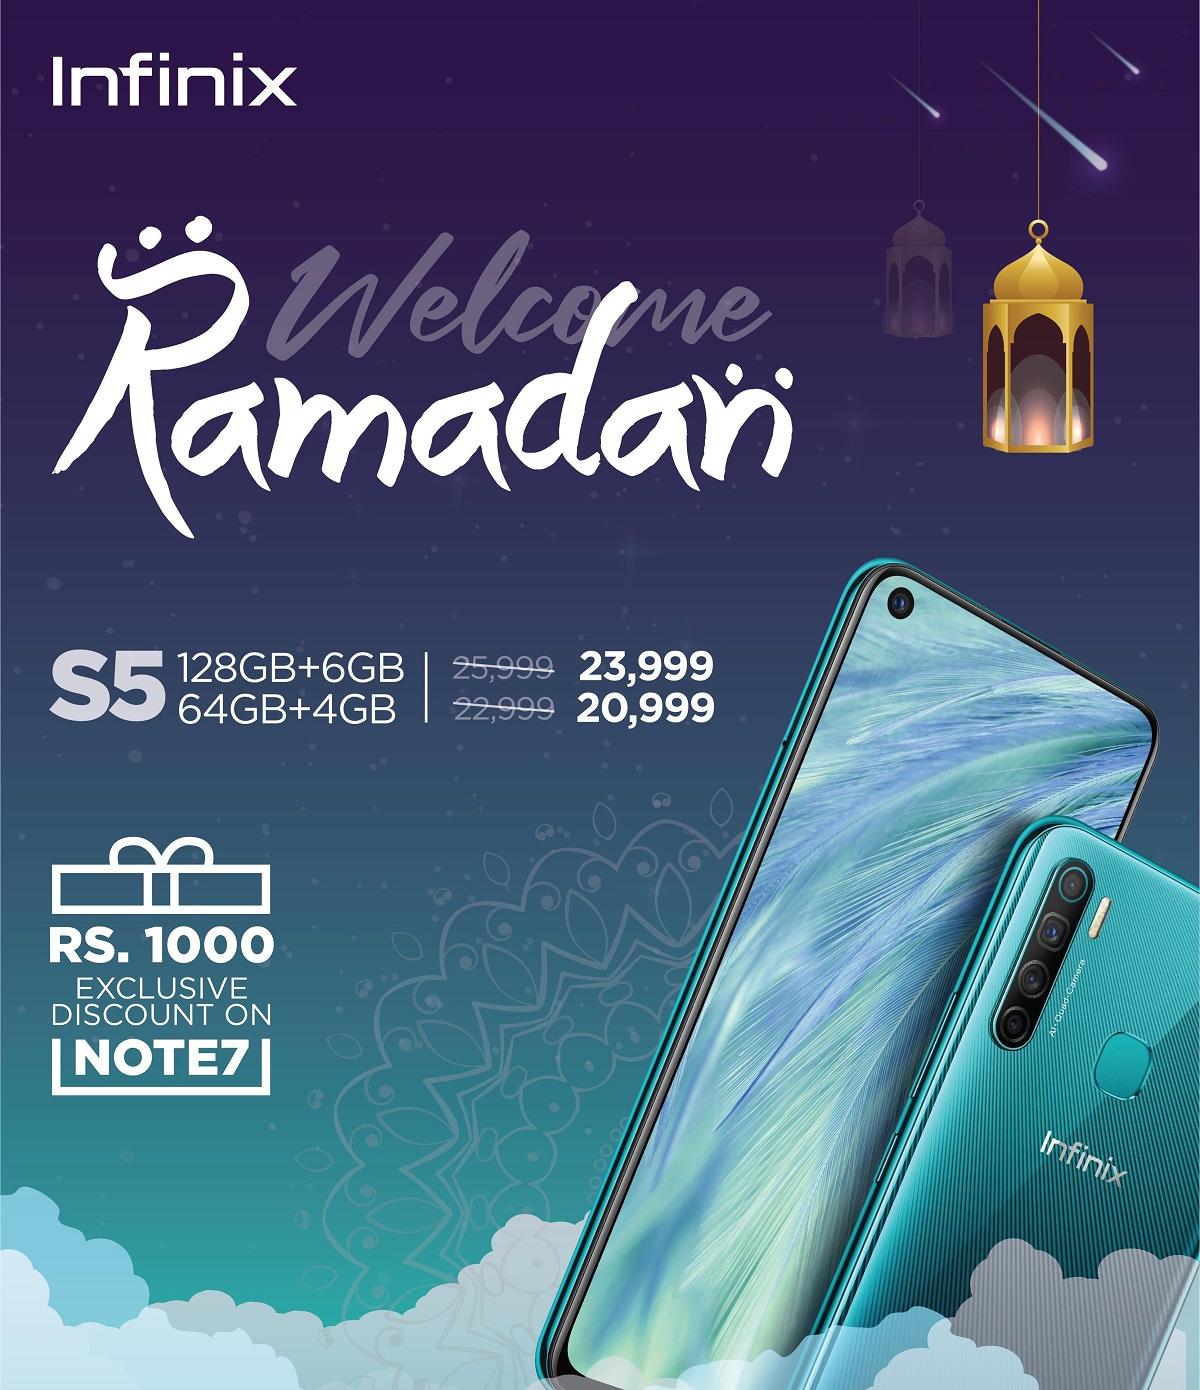 Infinix Welcomes Ramadan with Thrilling Discounts on its Latest S5 Series